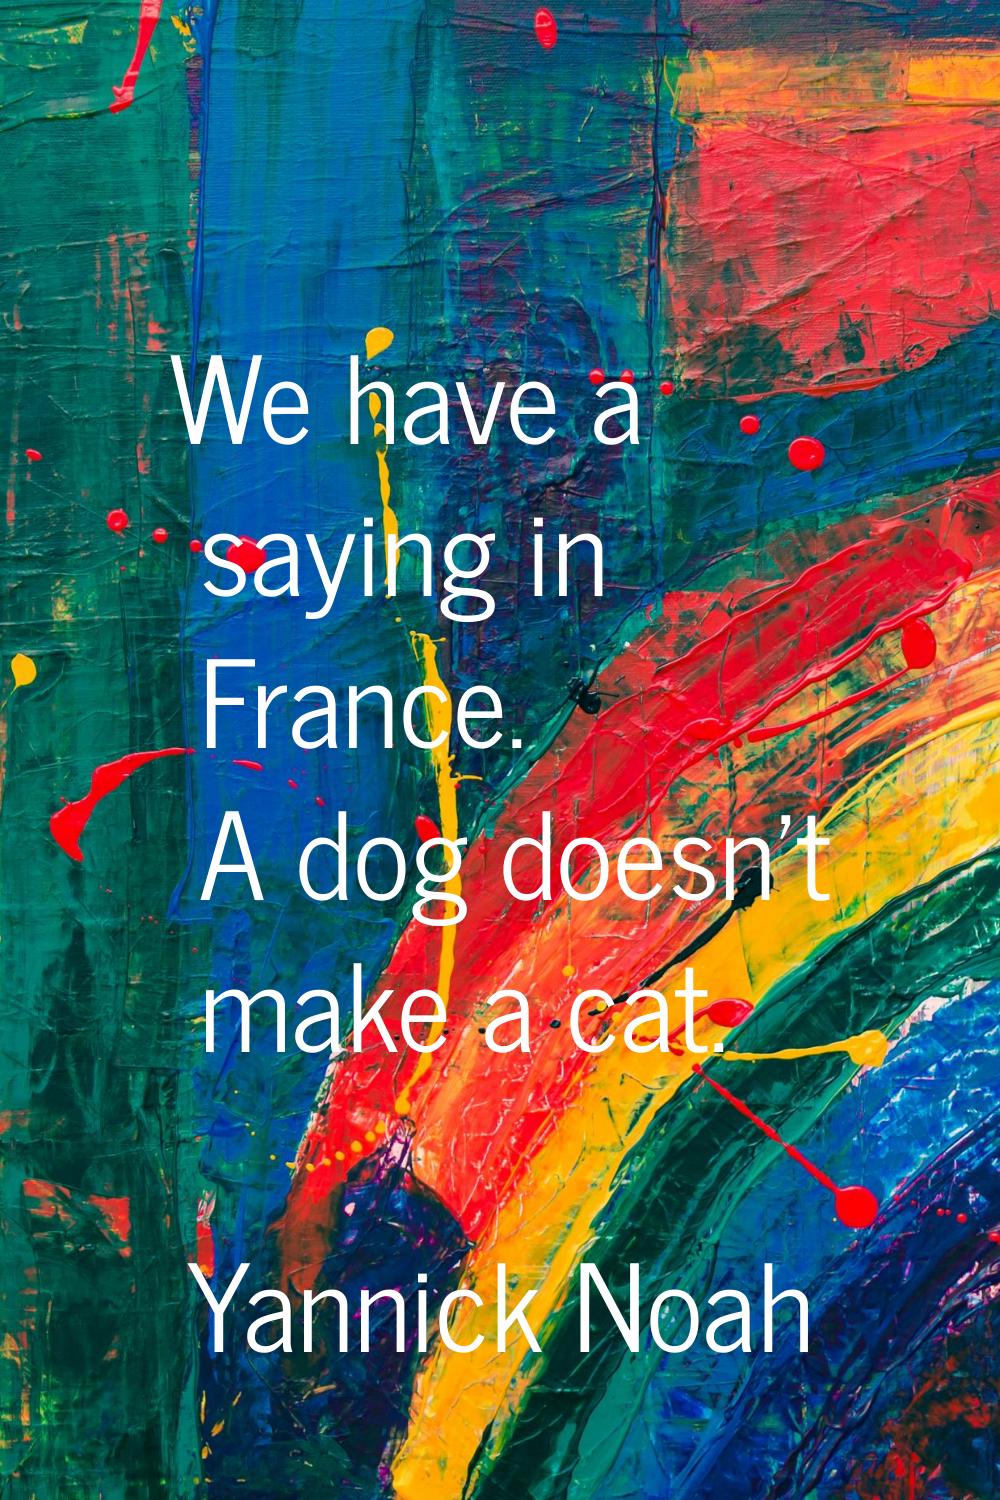 We have a saying in France. A dog doesn't make a cat.